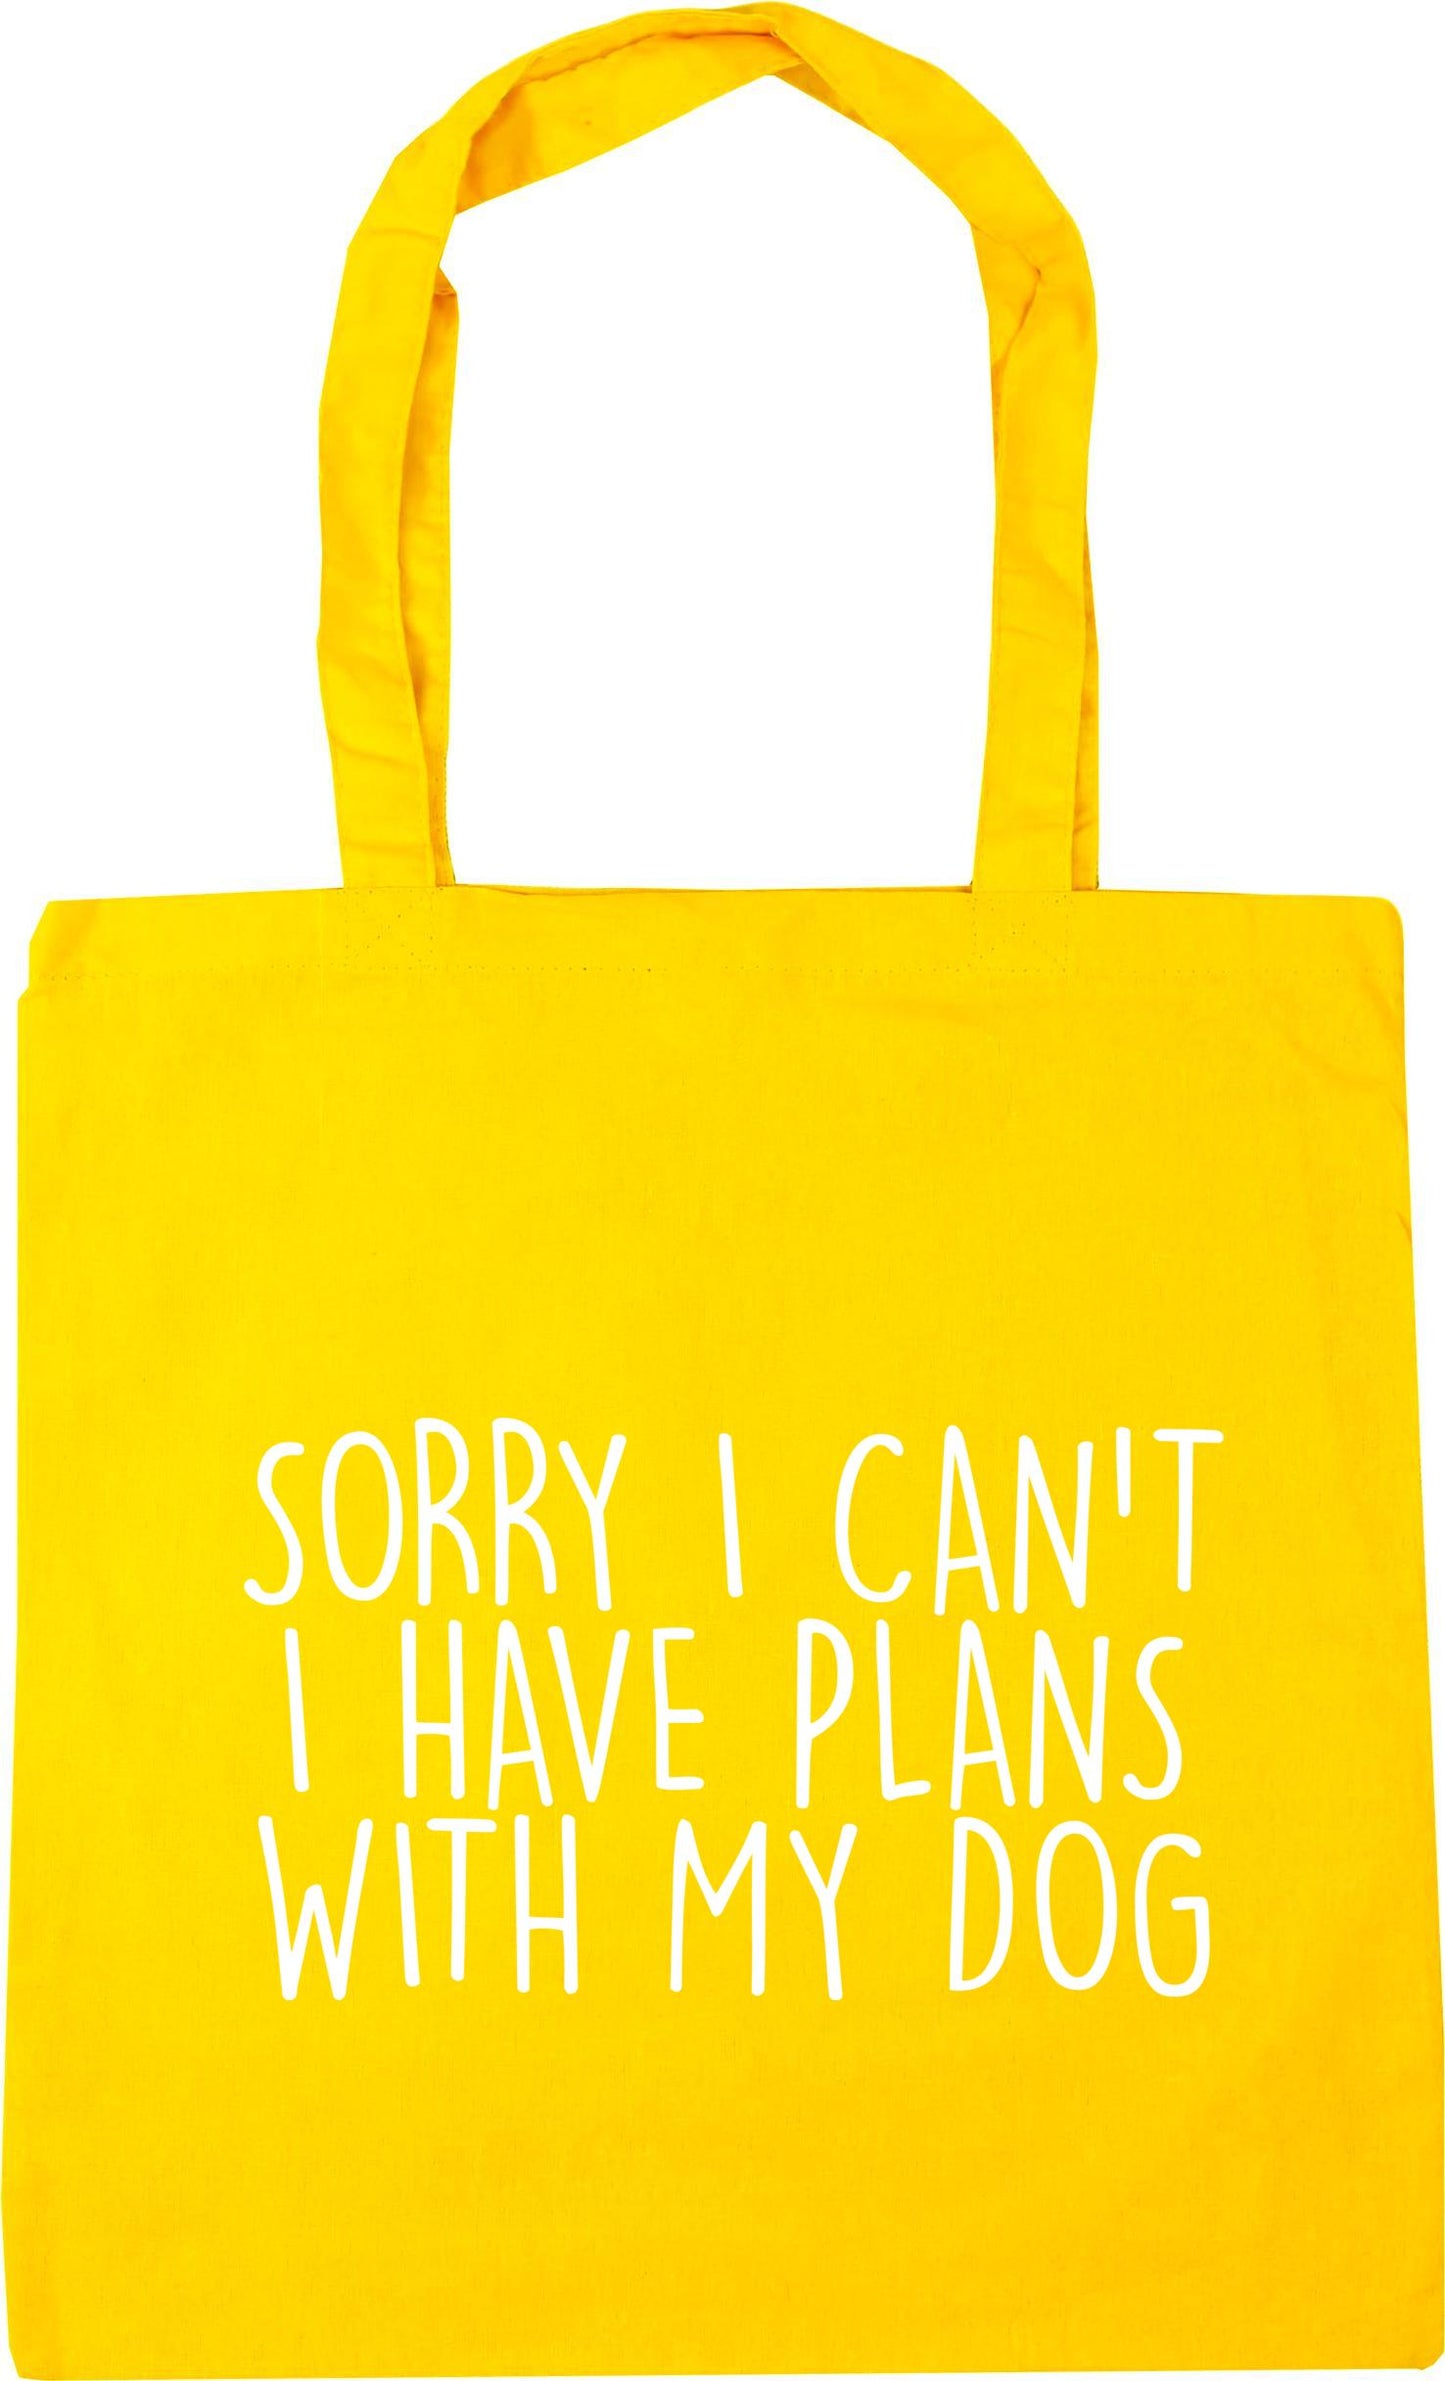 Sorry I Can't I Have Plans With My Dog Tote Bag